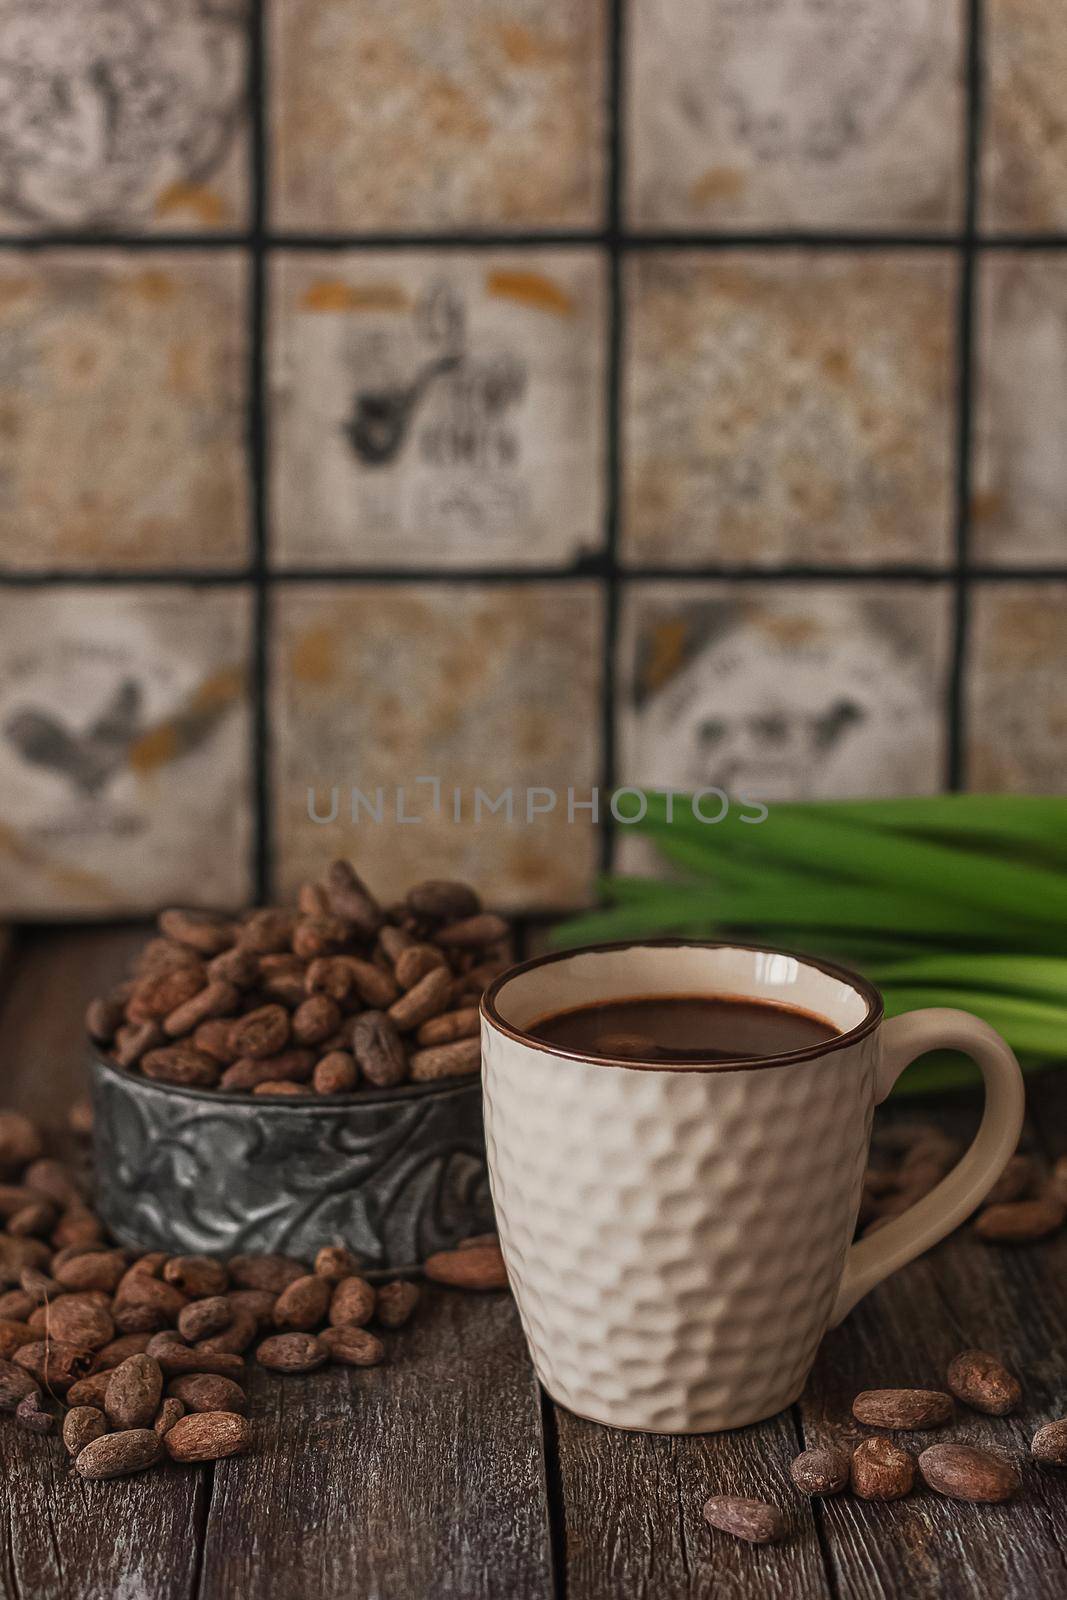 Hot chocolate drink in a white cup, chocolate cubes, cinnamon sticks and coffee bean on the dark wooden background. by mmp1206